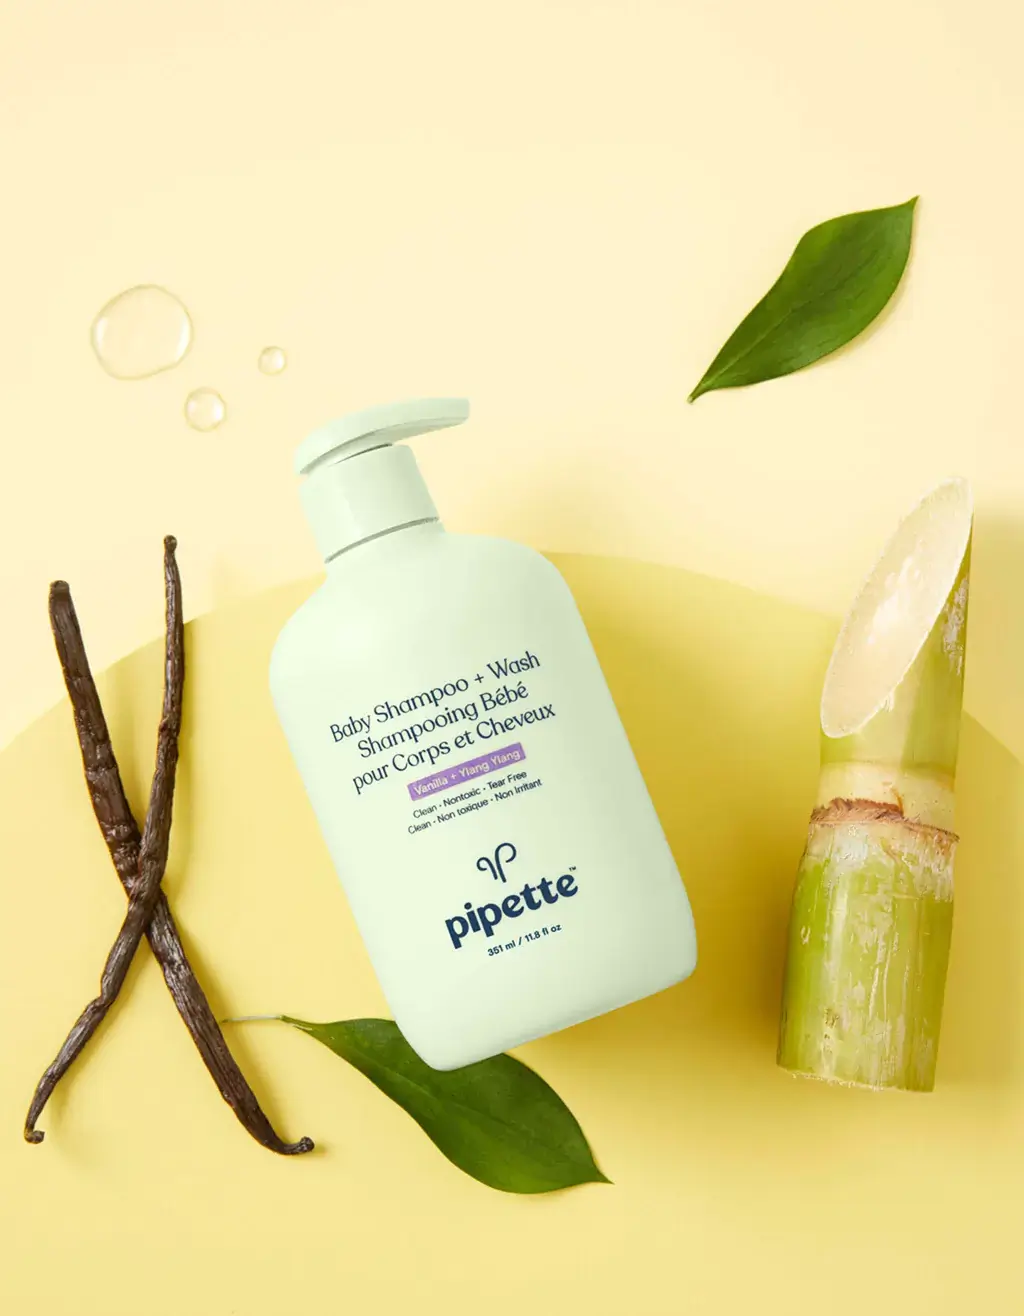 A topdown shot from Pipette's About Us page showing a pale green bottle of their baby shampoo and wash product